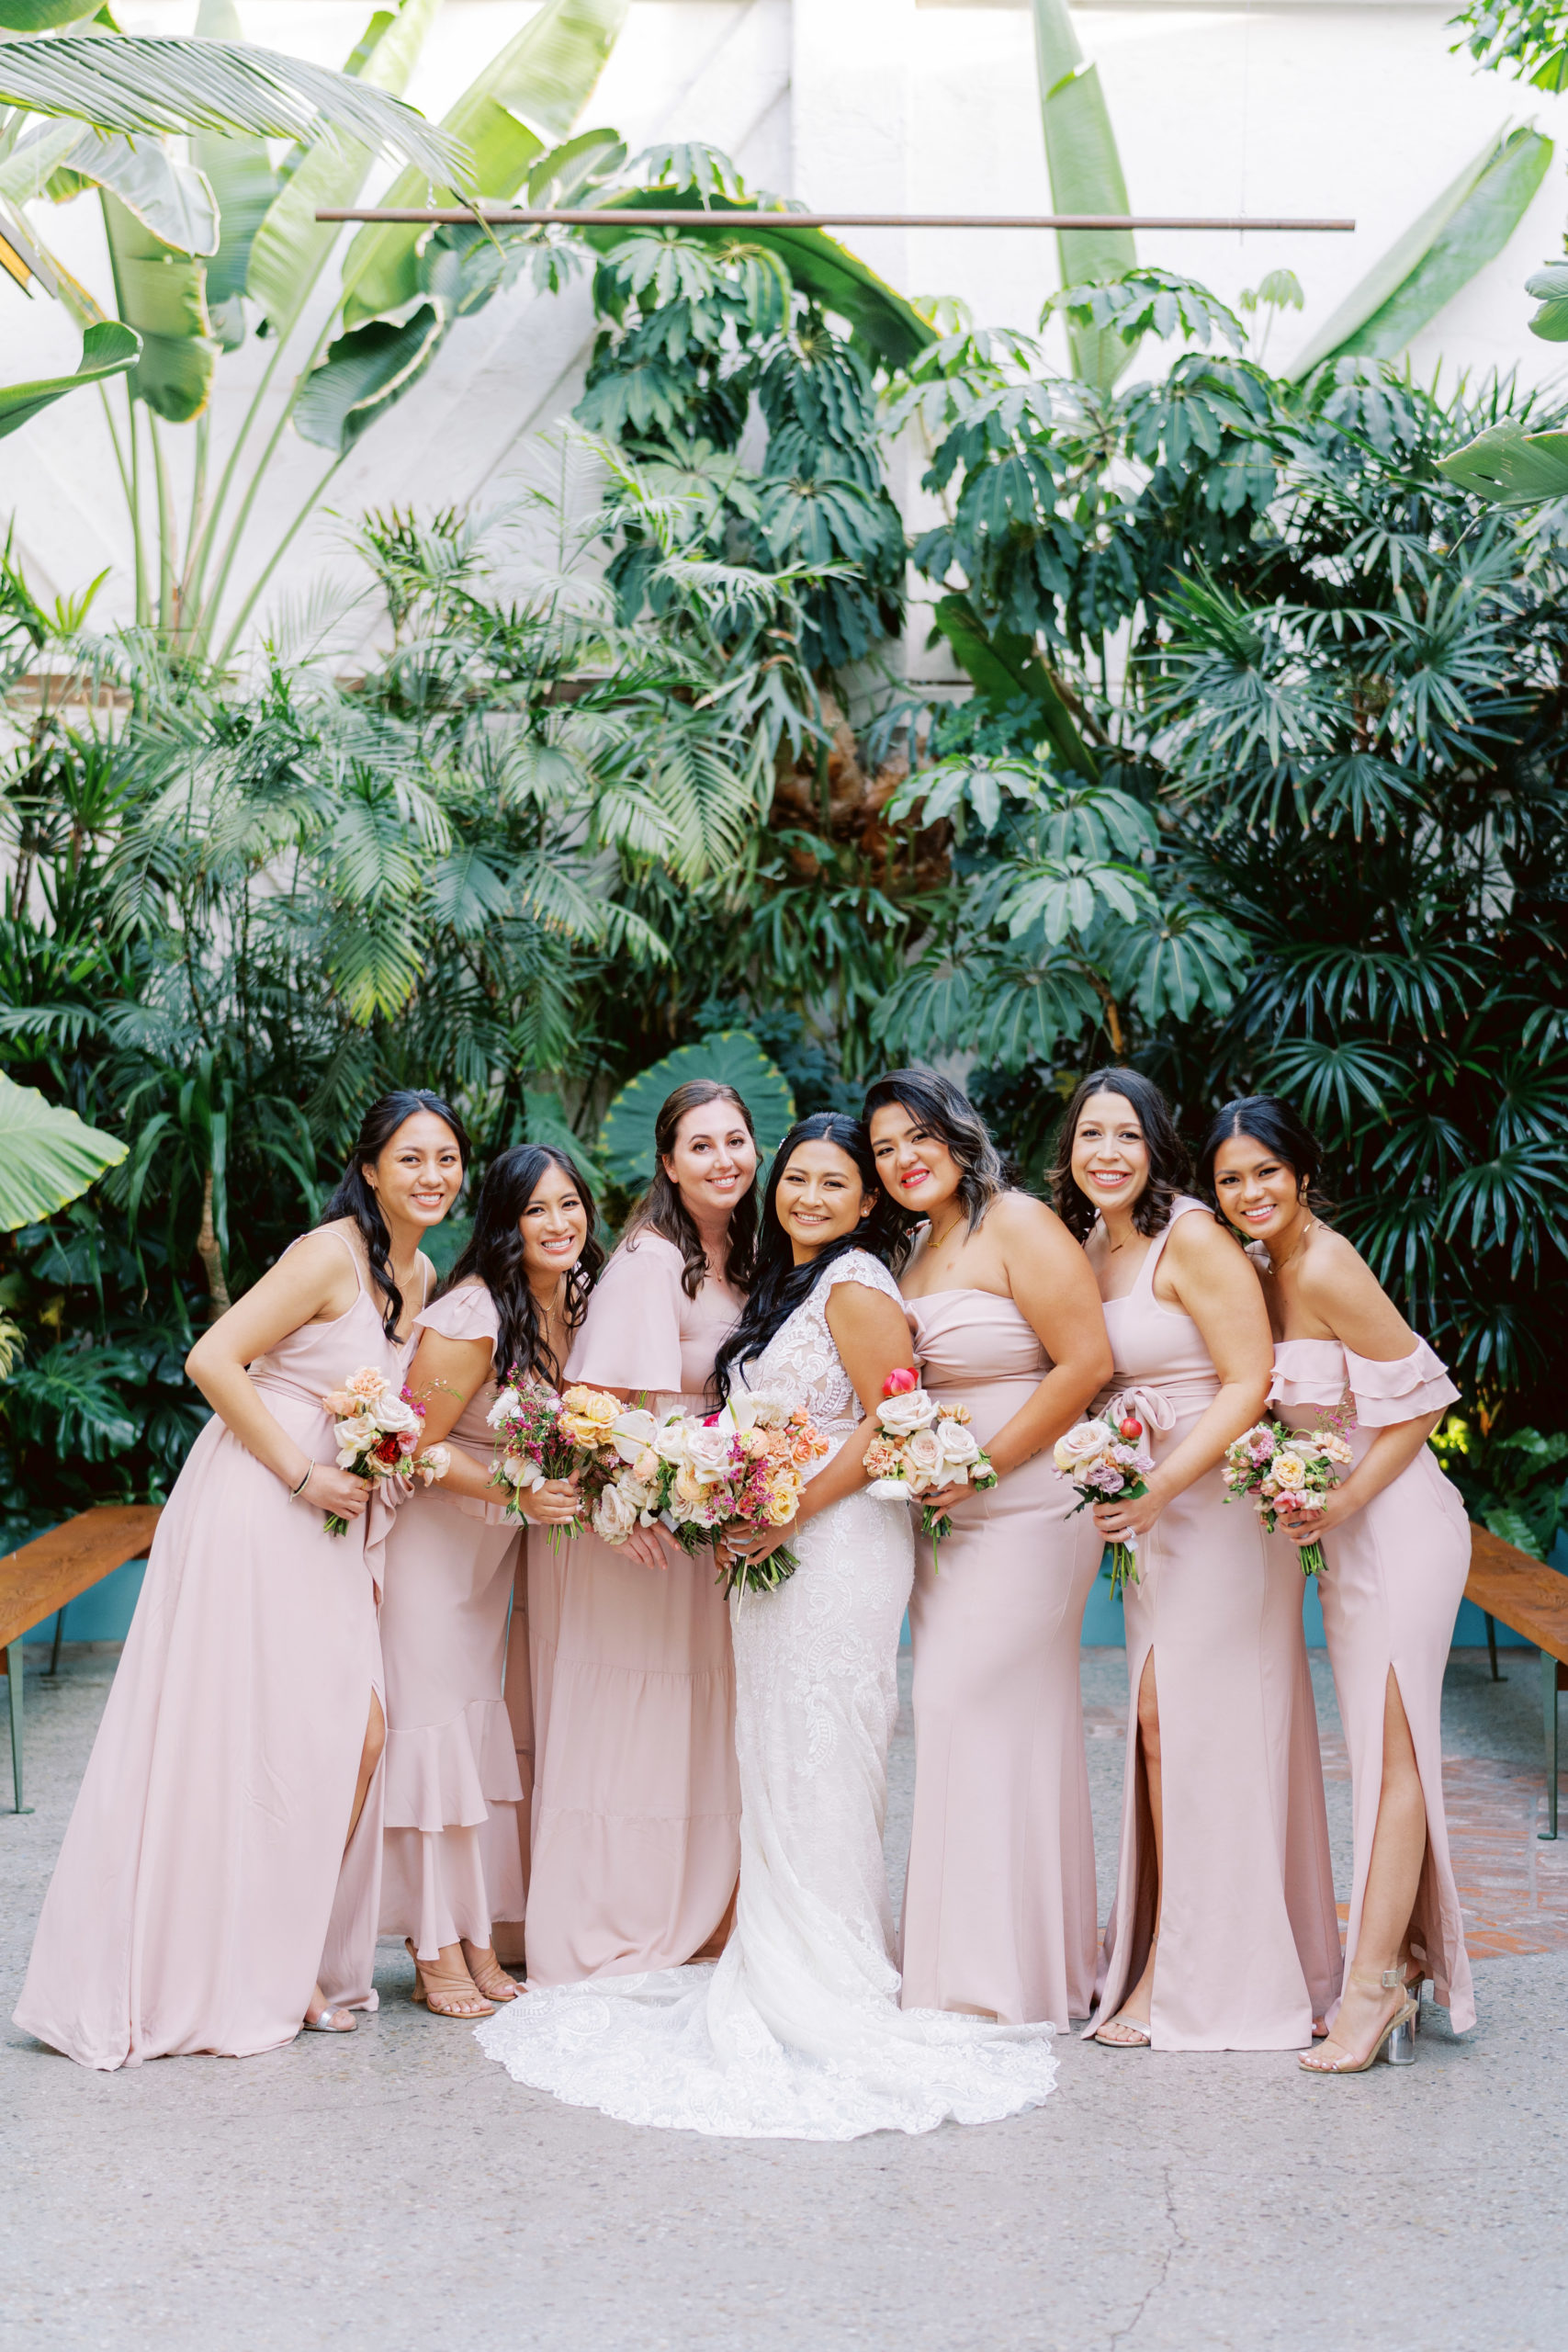 bride in lace dress with bright tropical bouquet poses with bridesmaids in light pink mix matched dresses during cocktail hour at The Valentine DTLA 